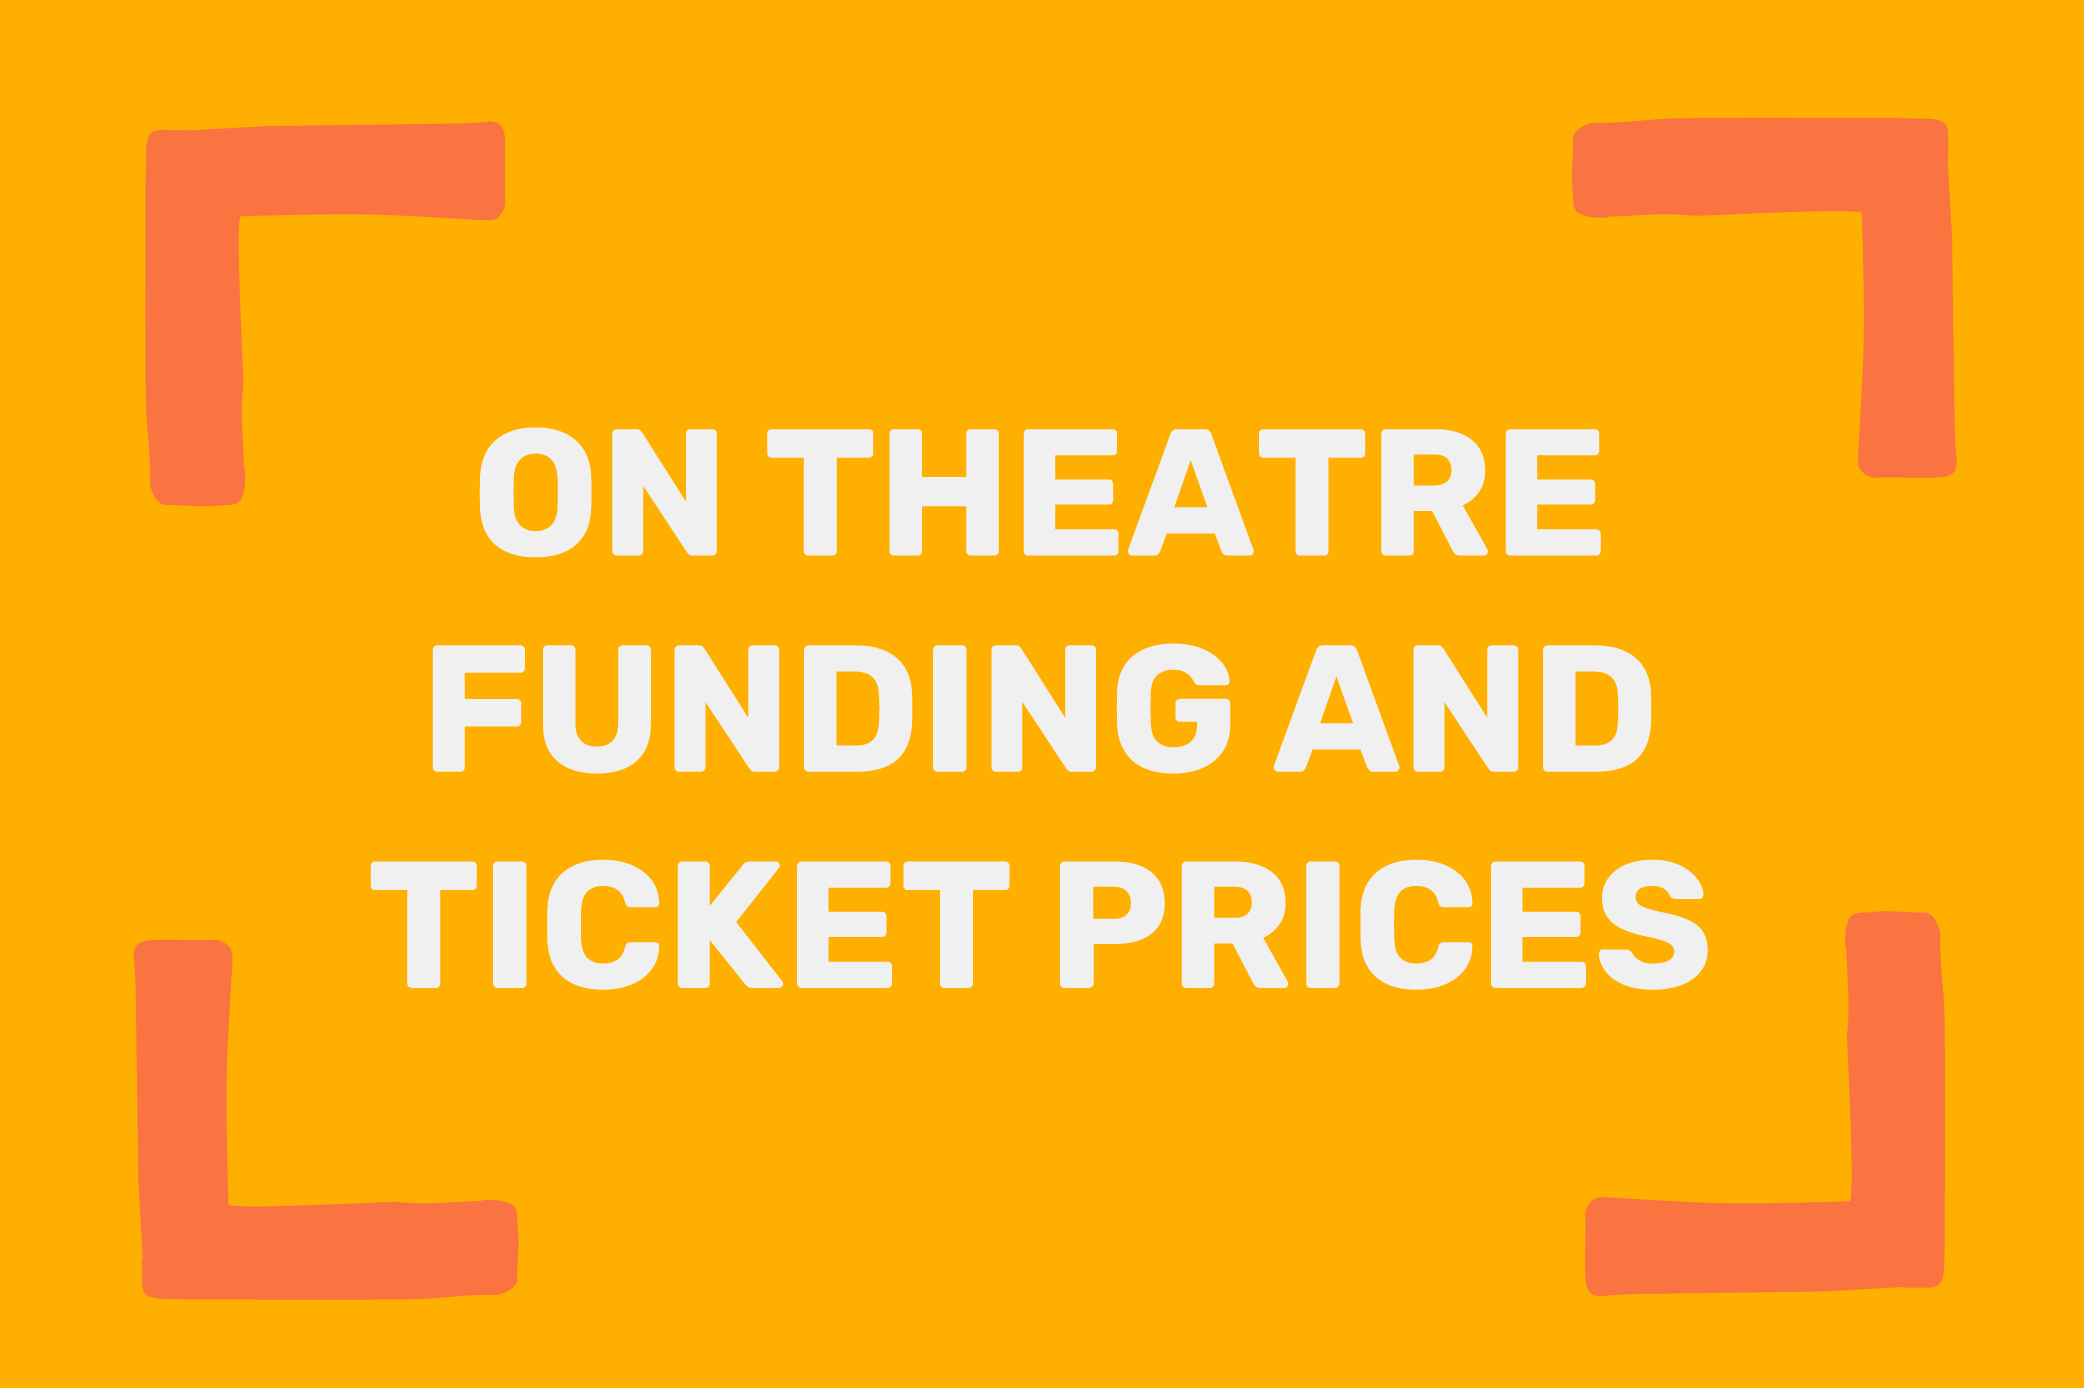 On theatre funding and ticket prices